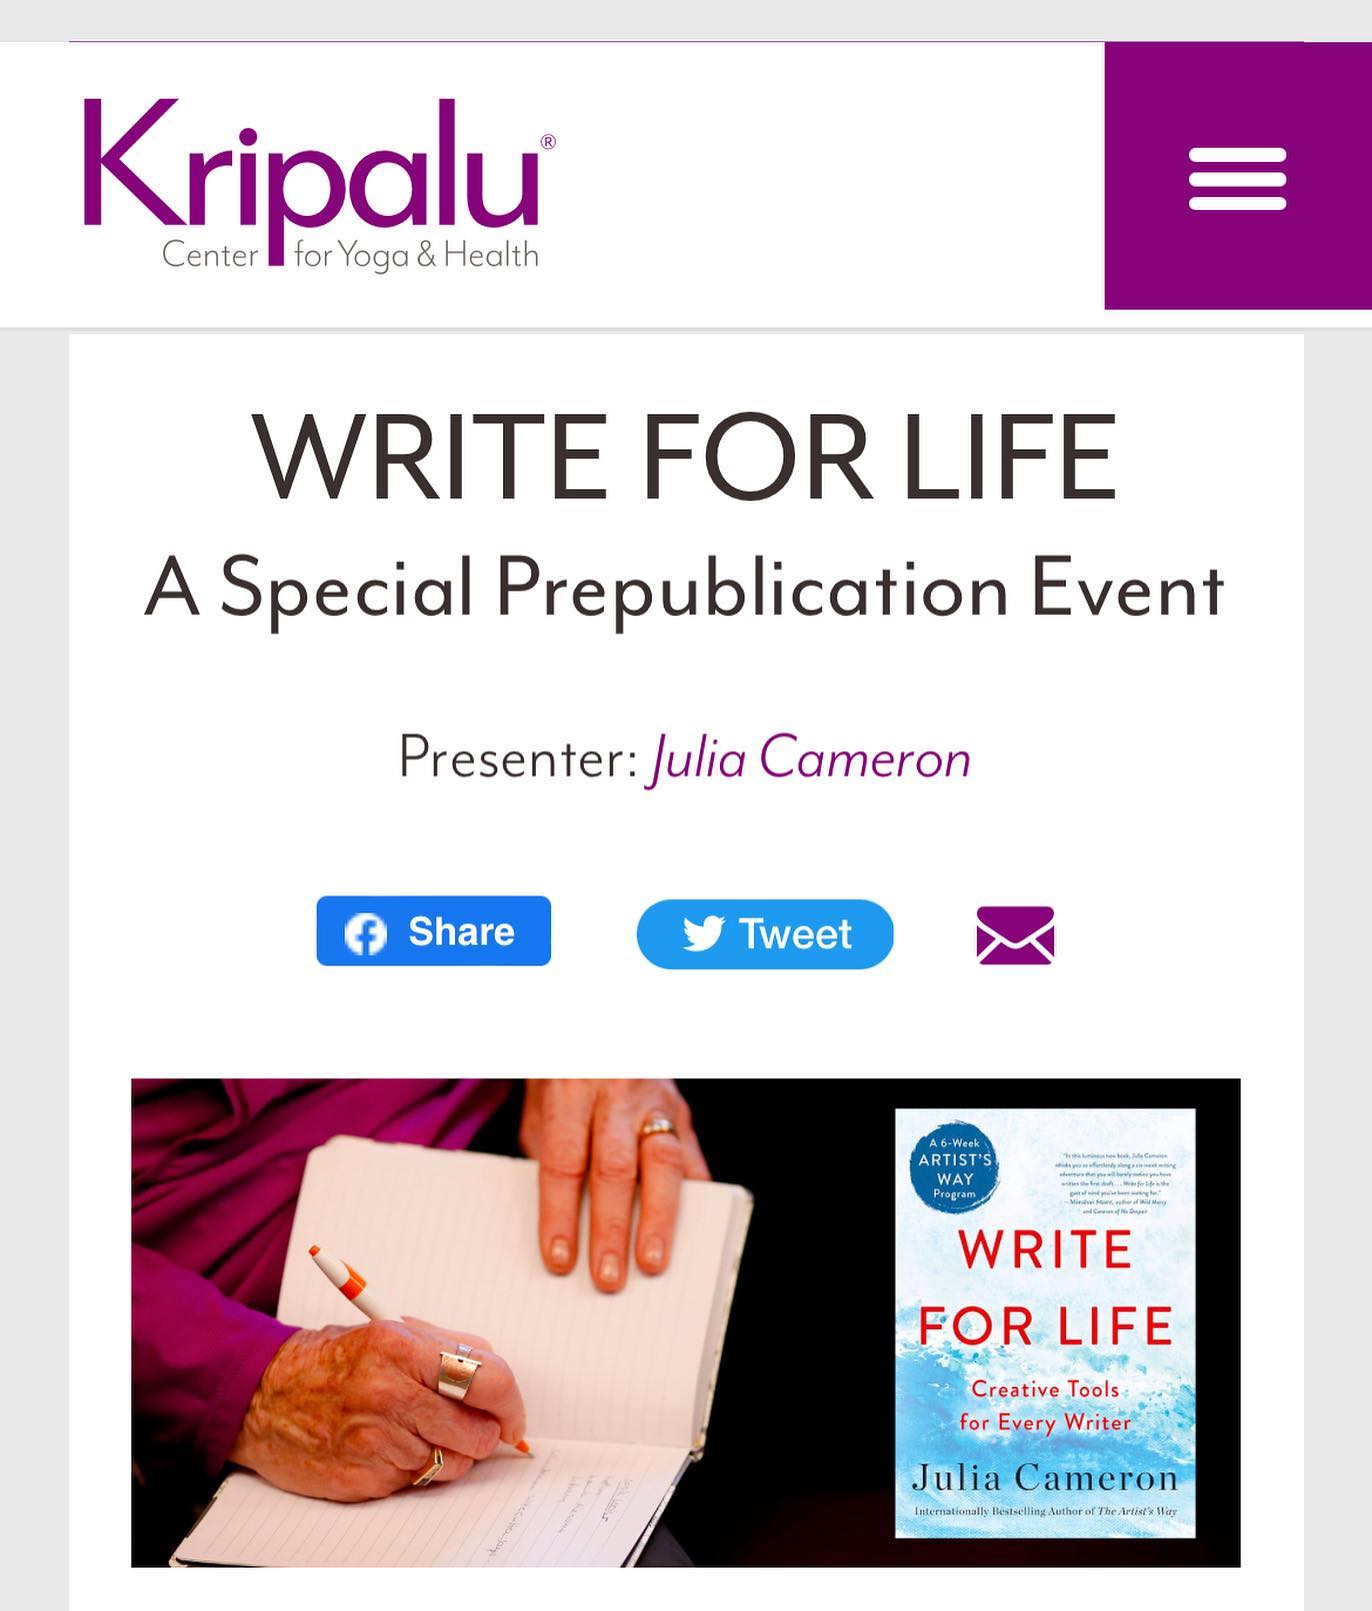 Join me live online December 8 for a special pre-publication event for my upcoming book, Write for Life! @kripalucenter @stmartinsessentials https://kripalu.org/presenters-programs/write-life-special-prepublication-event